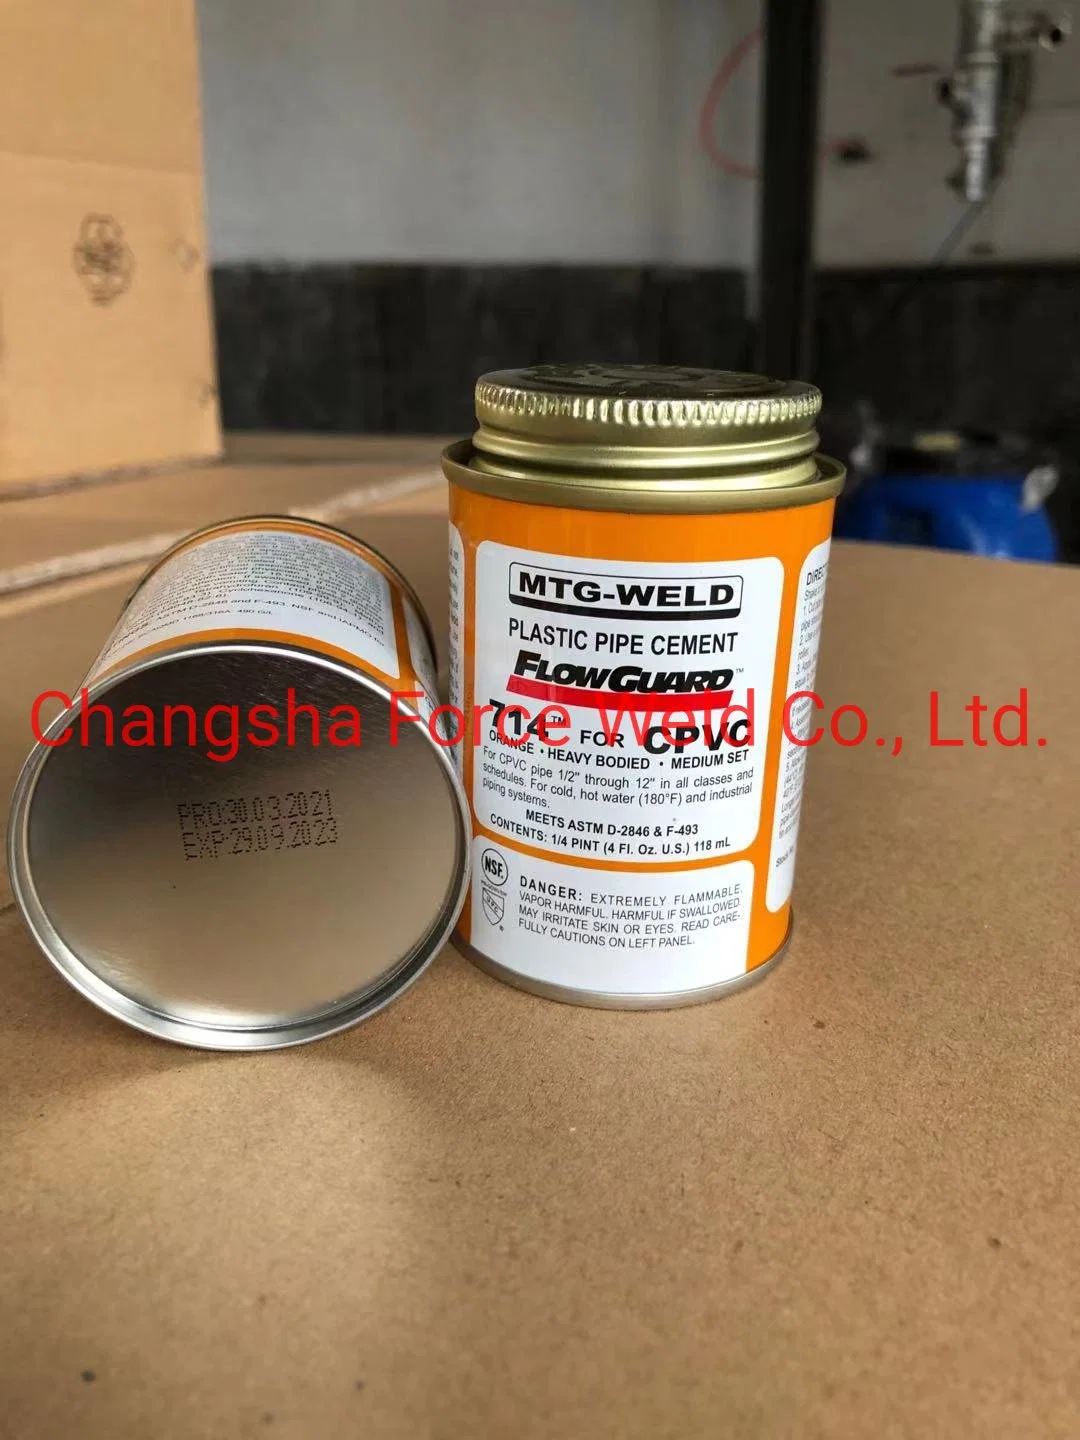 CPVC Glue/Cement/Piepe Glue/Pipe Cement/Solvent Cement/Solvent Glue in Orange Color USA Quality